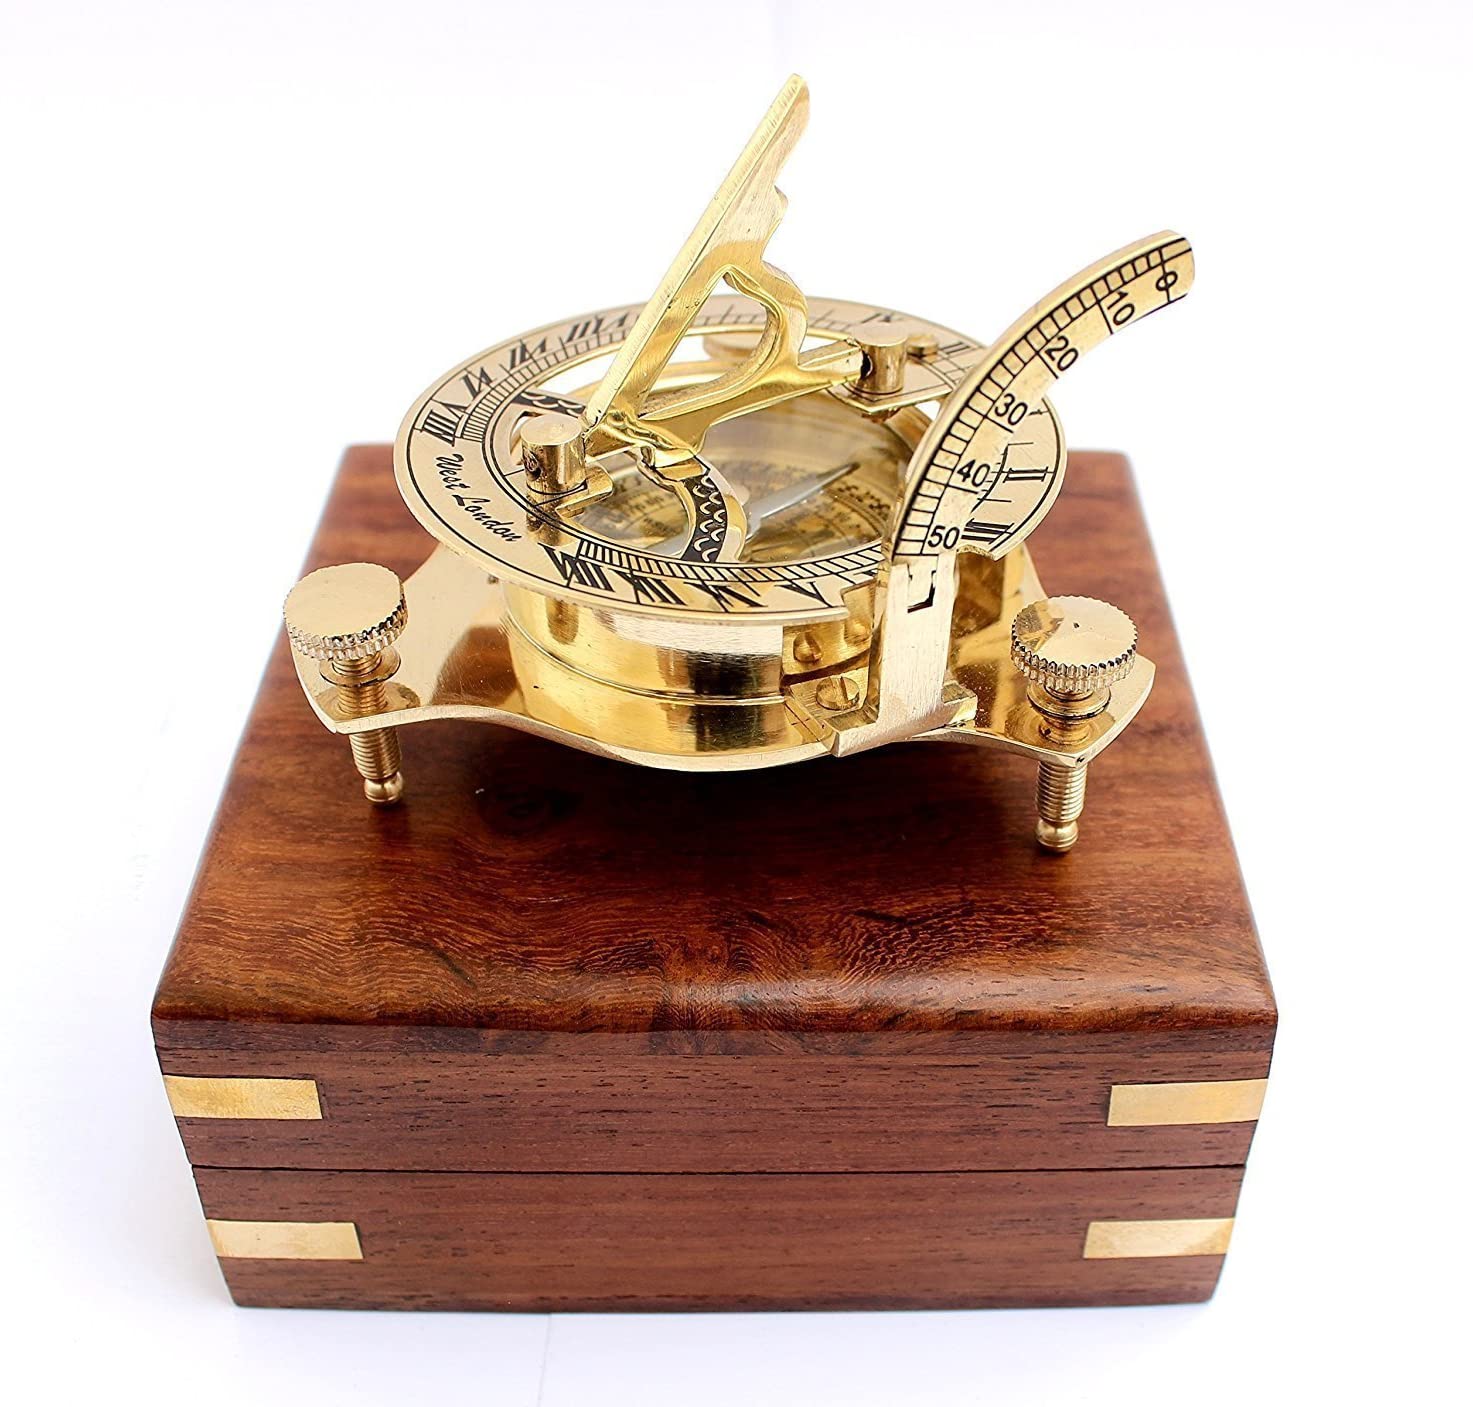 Vintage Brass Golden Maritime West London Sundial 3" Compass With Wooden Box